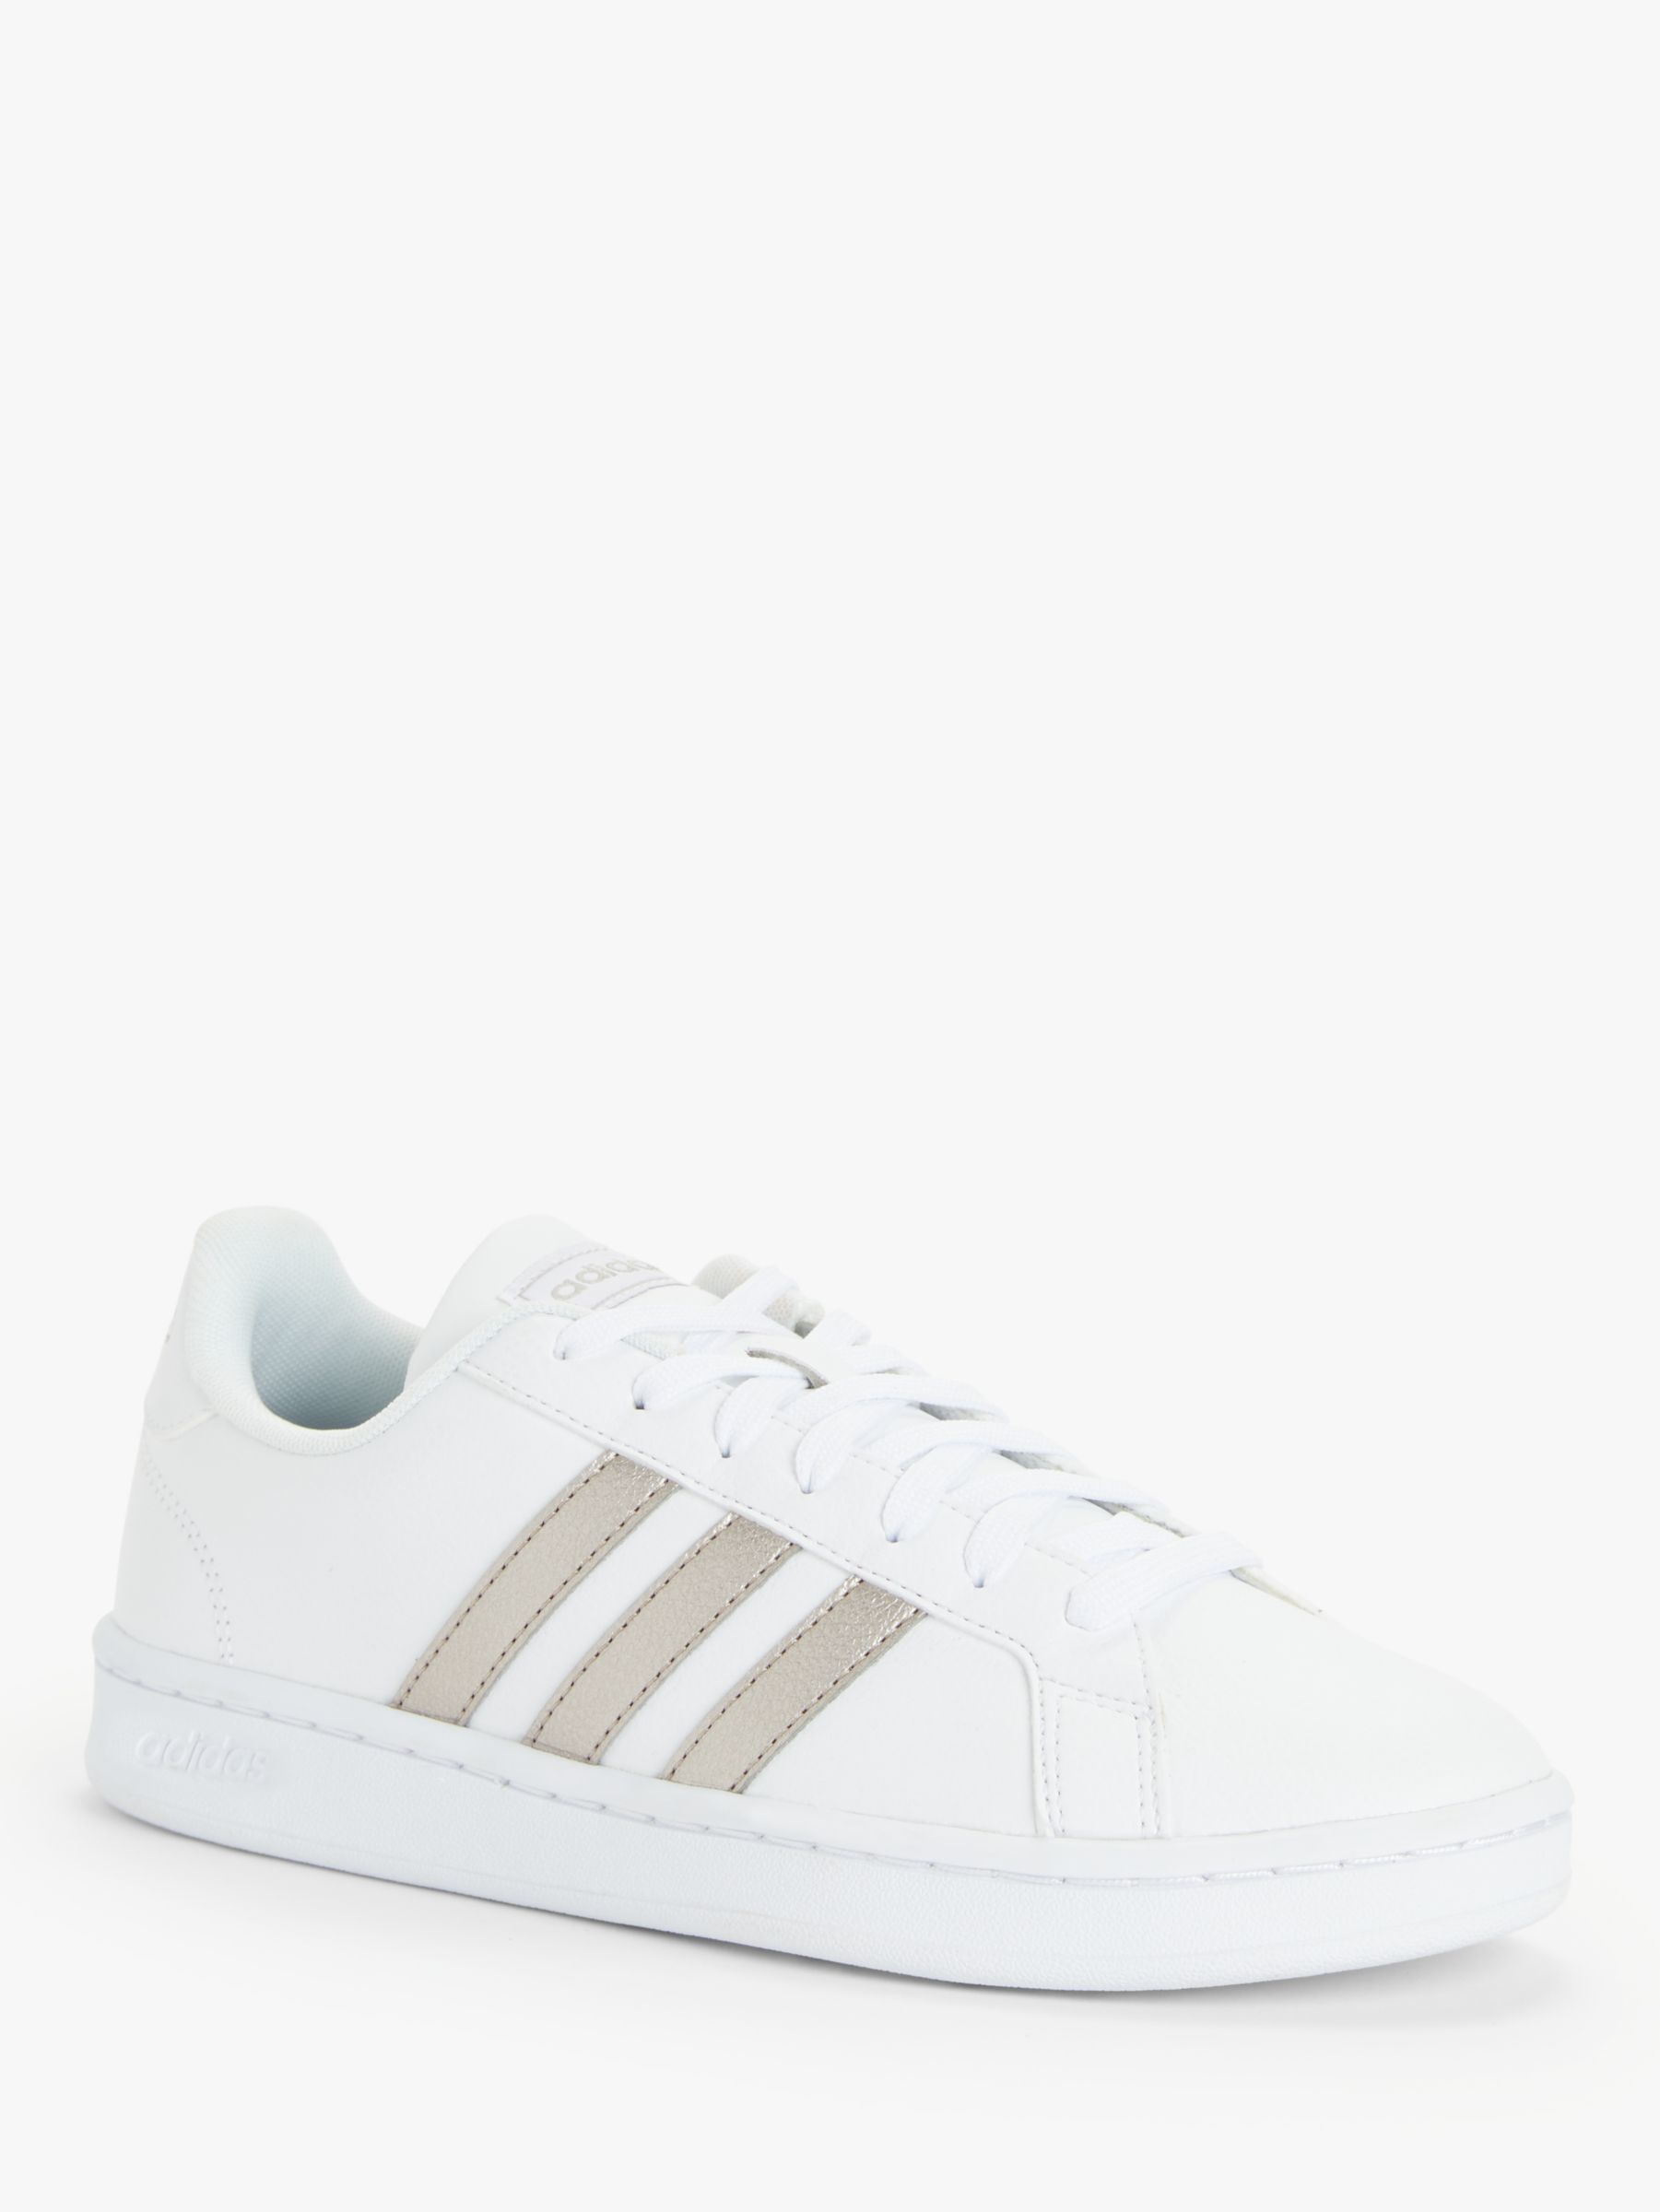 adidas Grand Court Women's Trainers at 